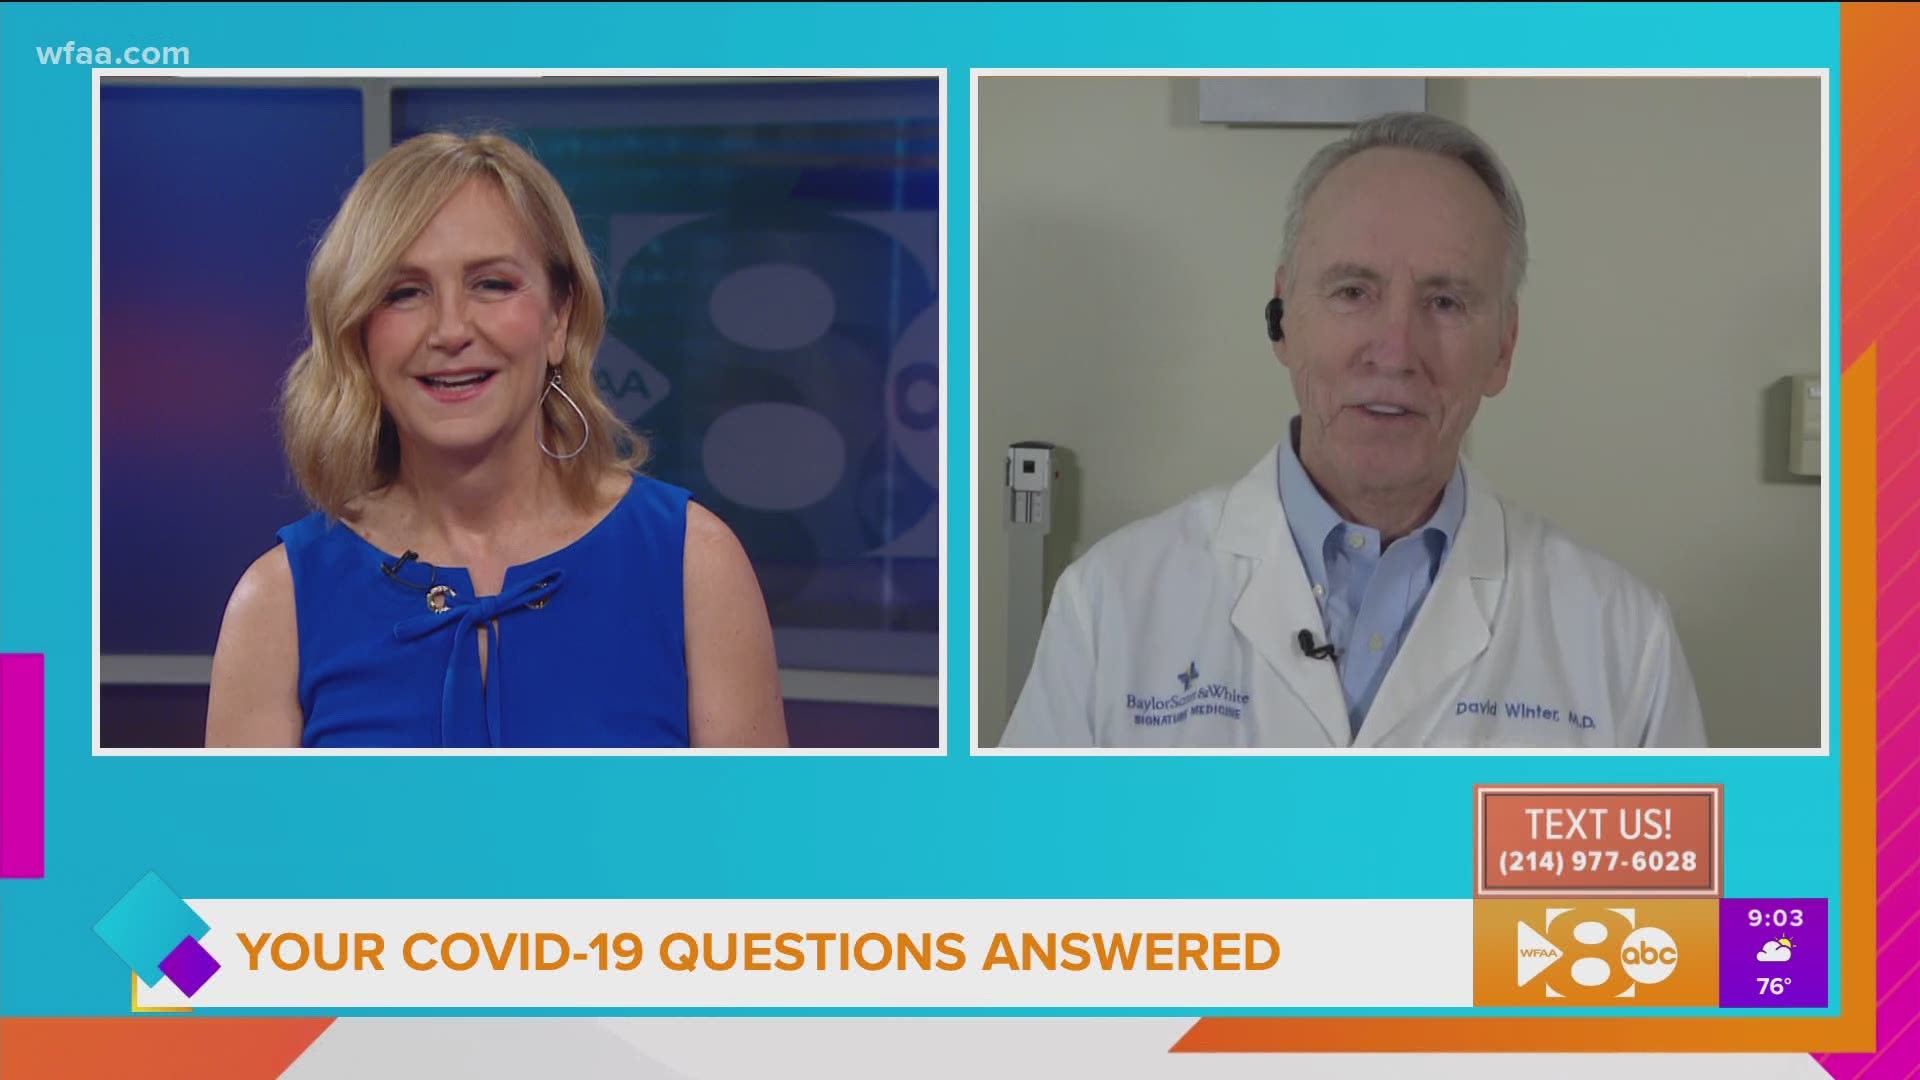 Dr.Winter answers COVID-19 questions